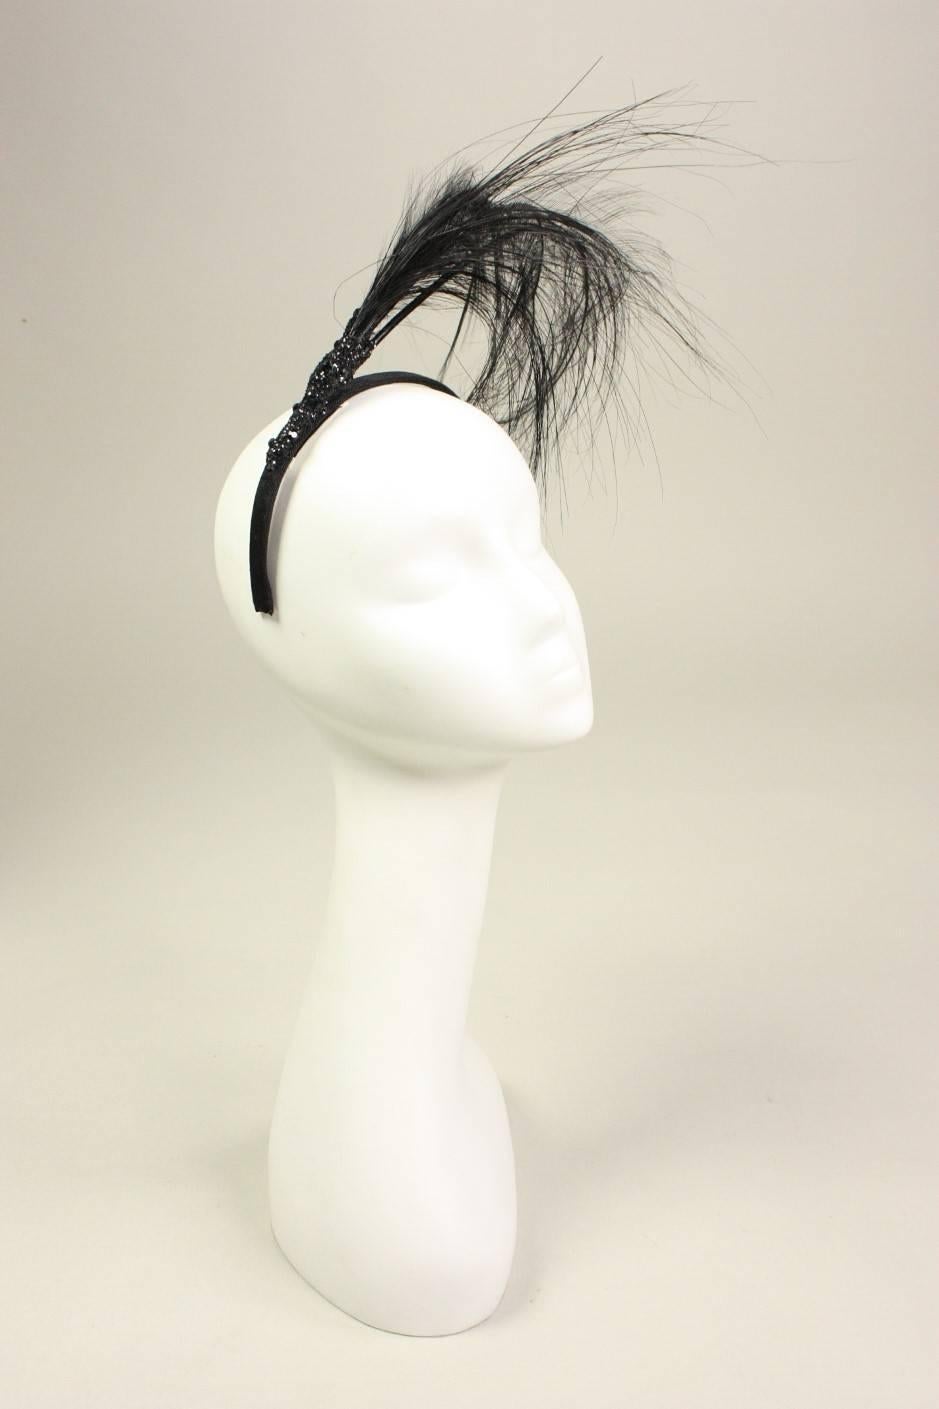 Fun and dramatic headpiece from Eric Javitz is made of a black velvet-covered headband.  Long curved plumes extend up and over the head.  Black glittery accent where the plumes meet the headband.